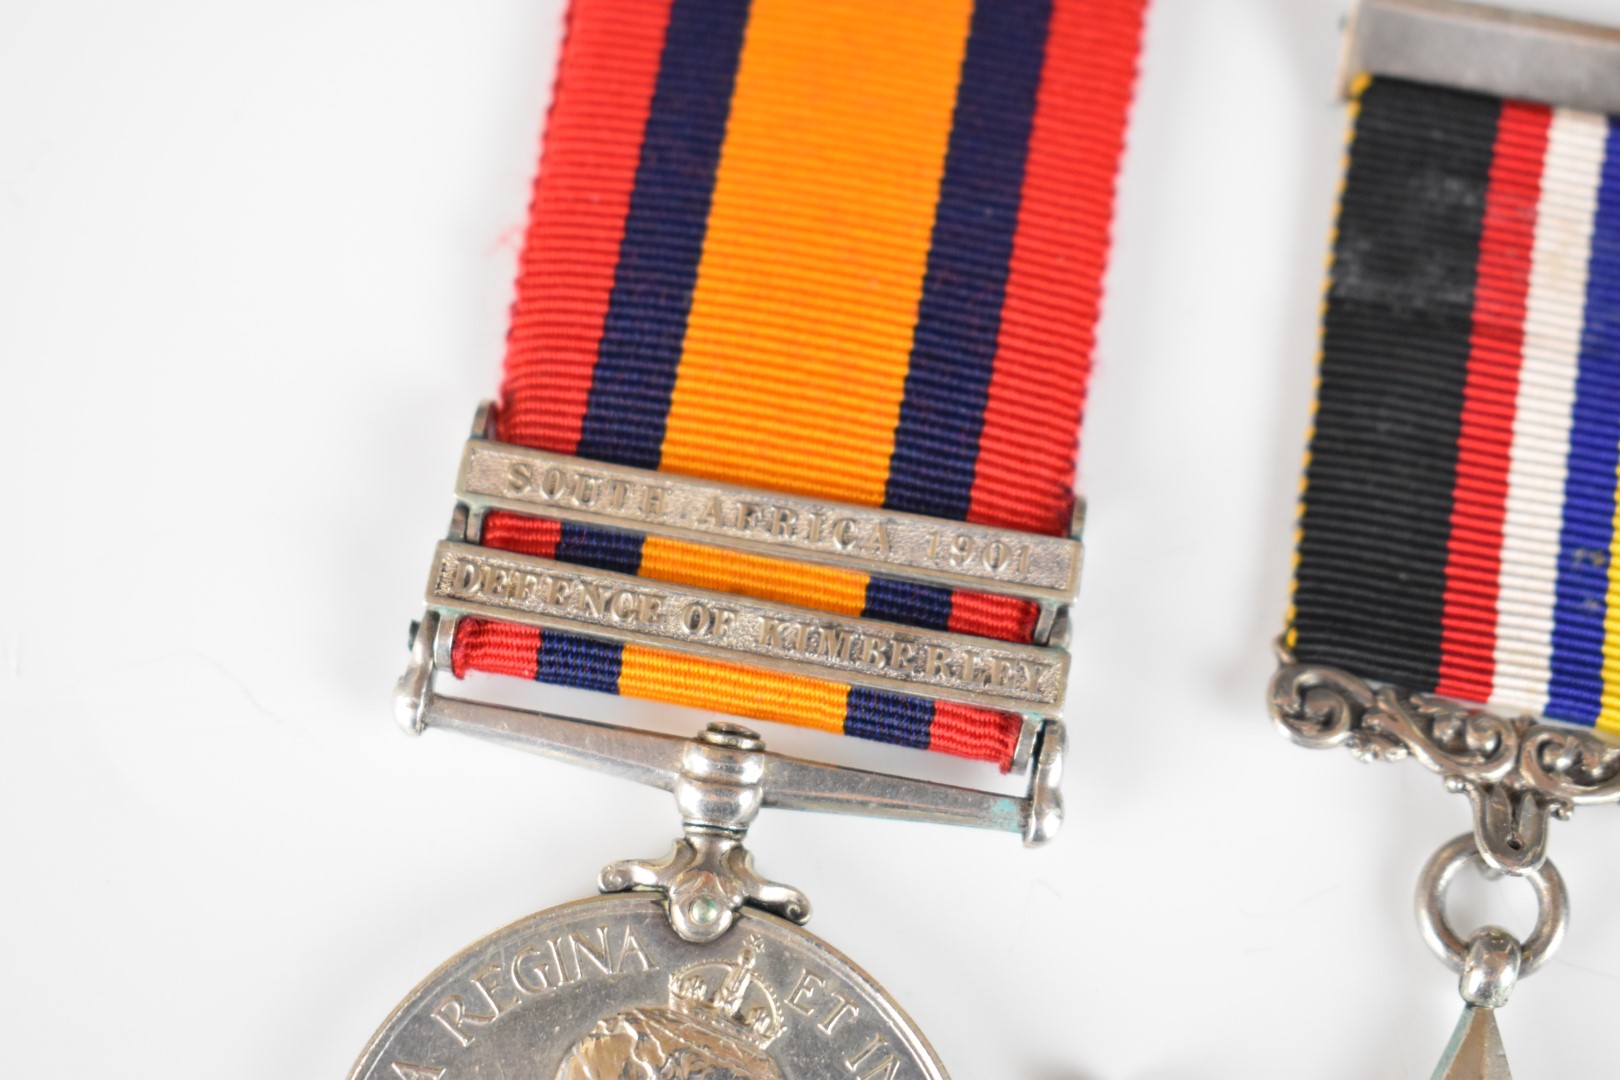 Queen's South Africa Medal with clasps for Defence of Kimberley and South Africa 1901 named to 828 - Image 15 of 22